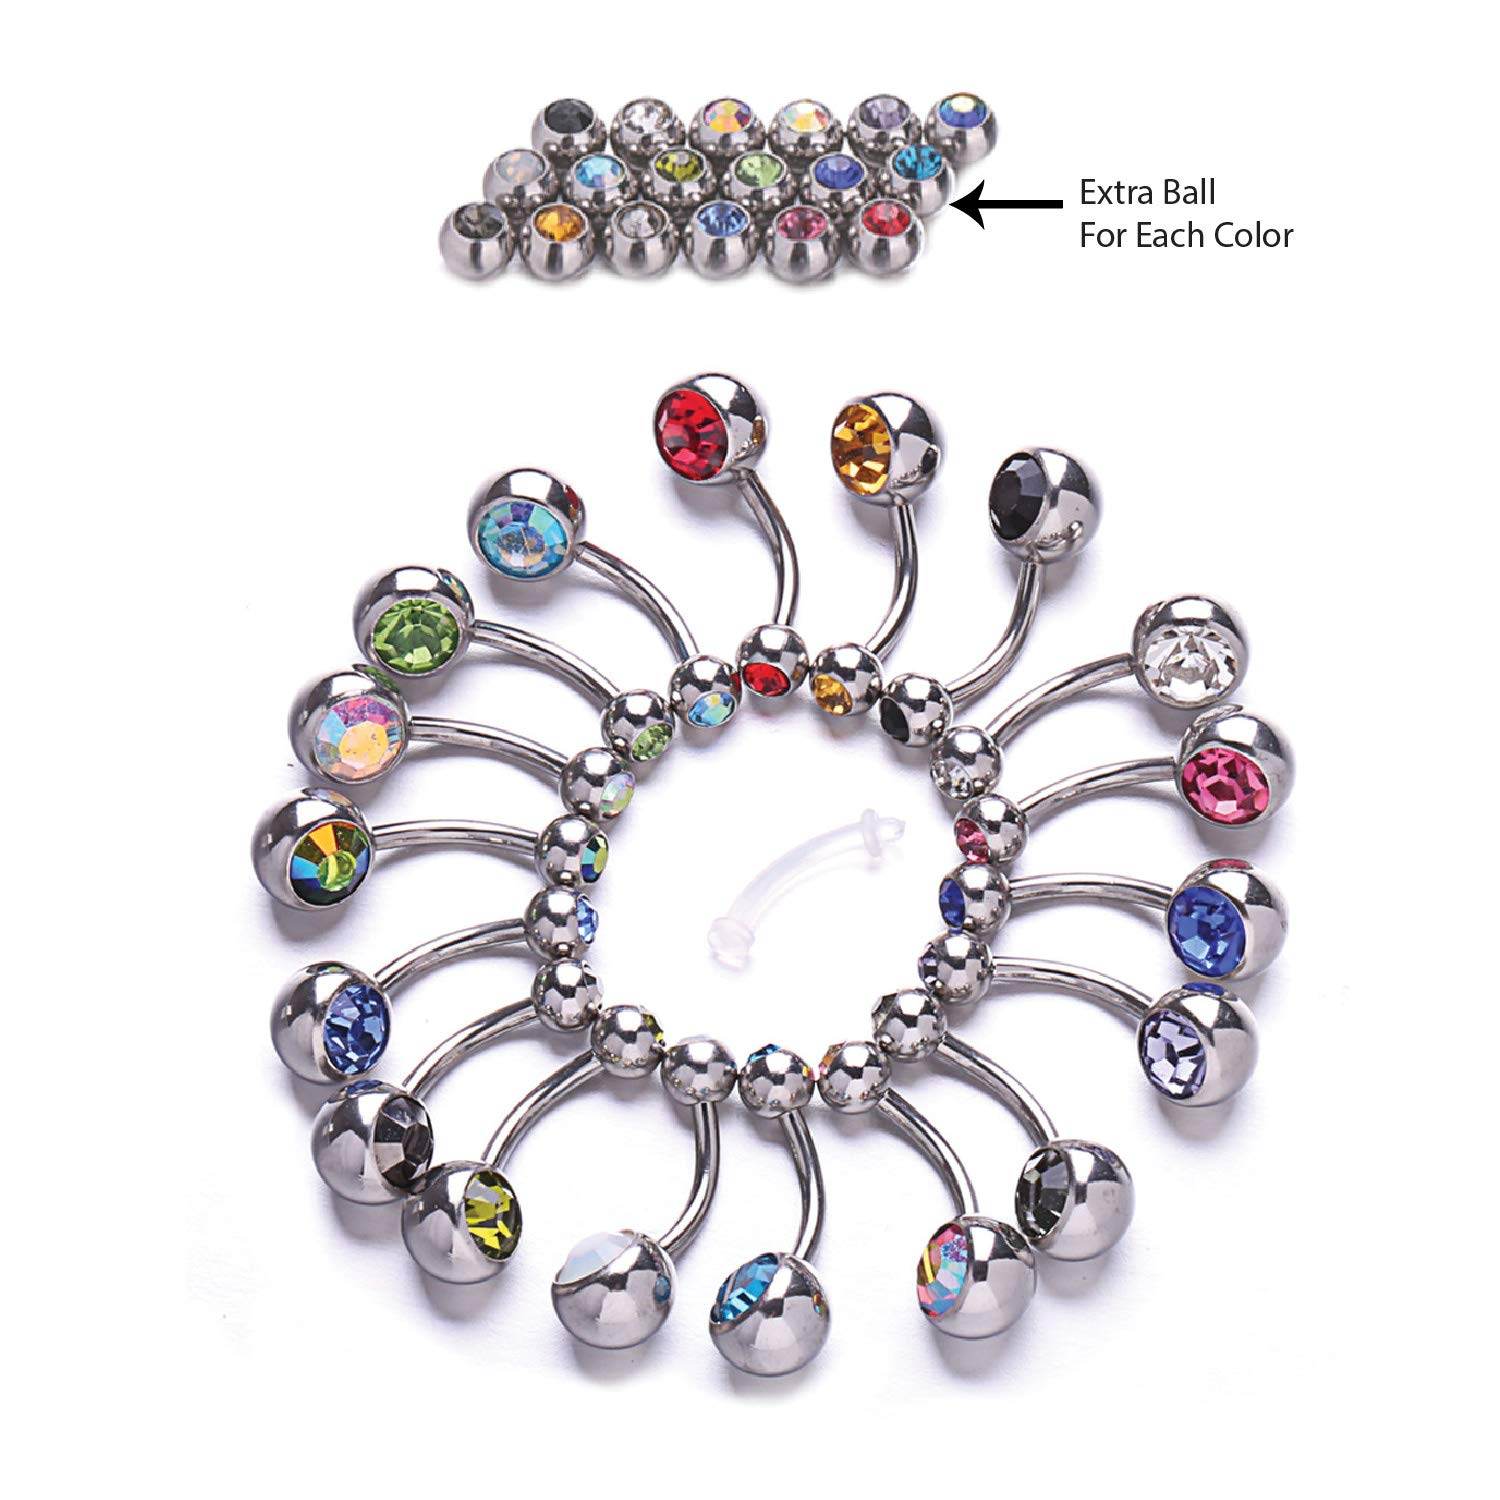 BodyJ4You 18PC Belly Button Rings Set - 14G Multicolor Surgical Stainless Steel - Shiny CZ Crystals Clear Pink Aqua Black - Replacement Extra Pack - Women Girls Body Piercing Jewelry